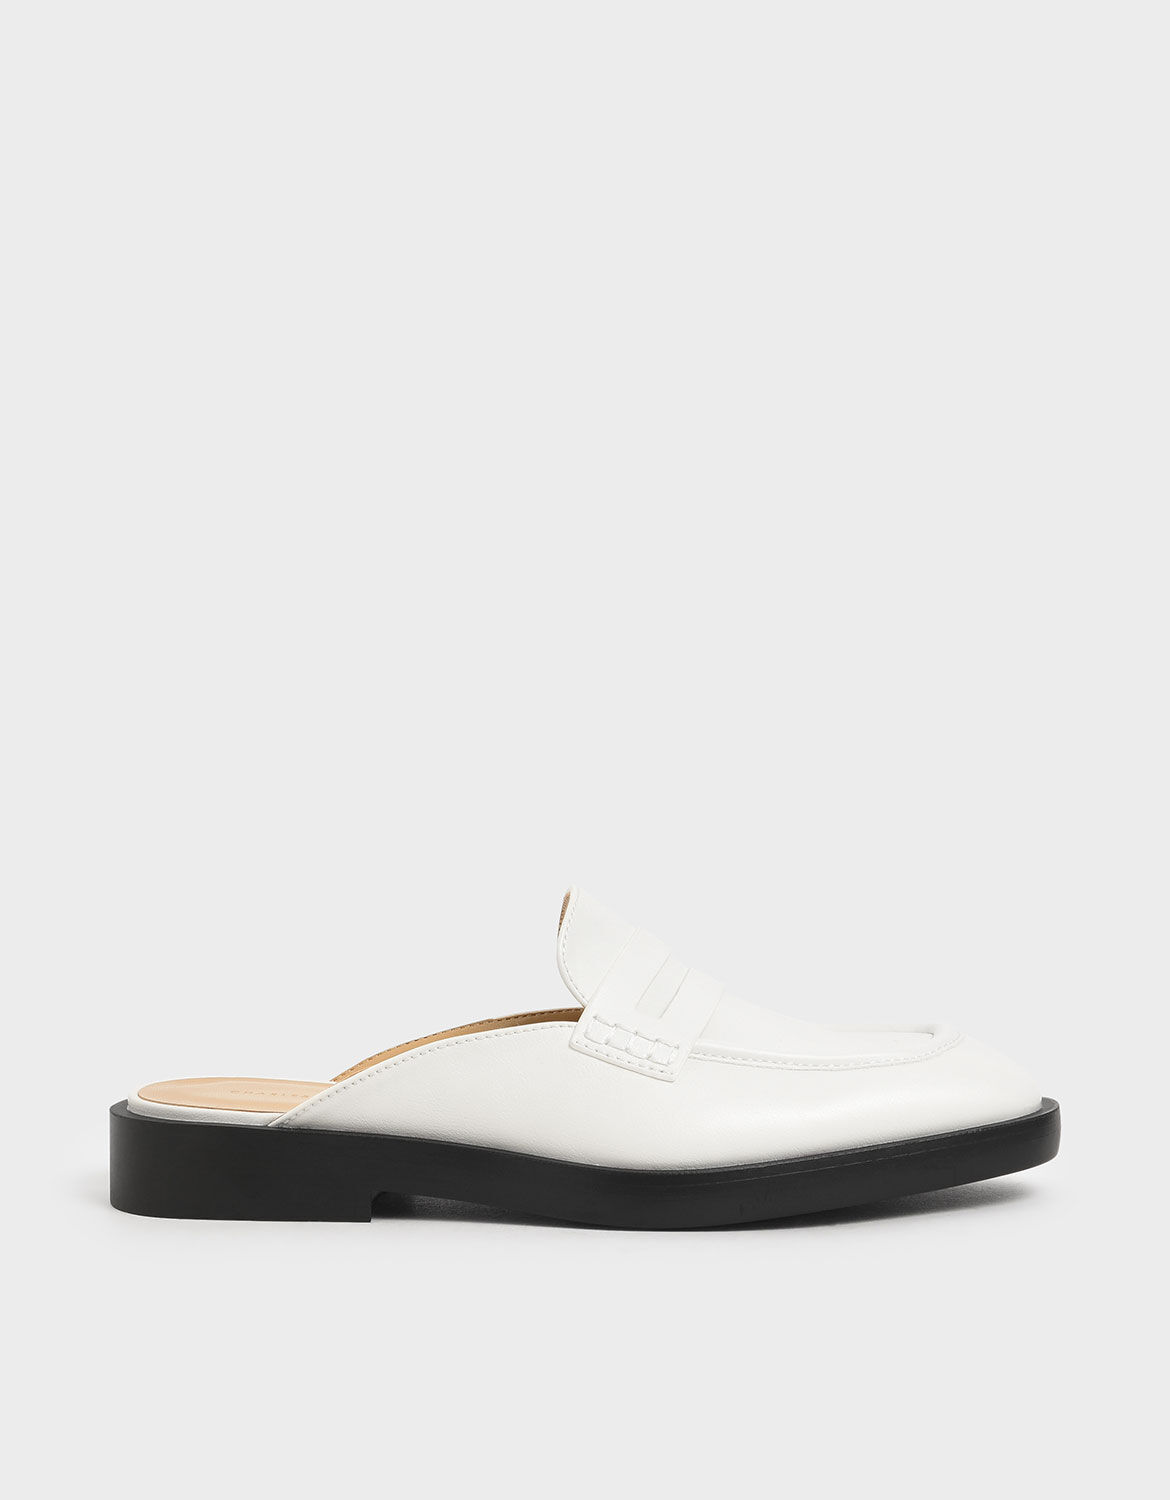 white penny loafer